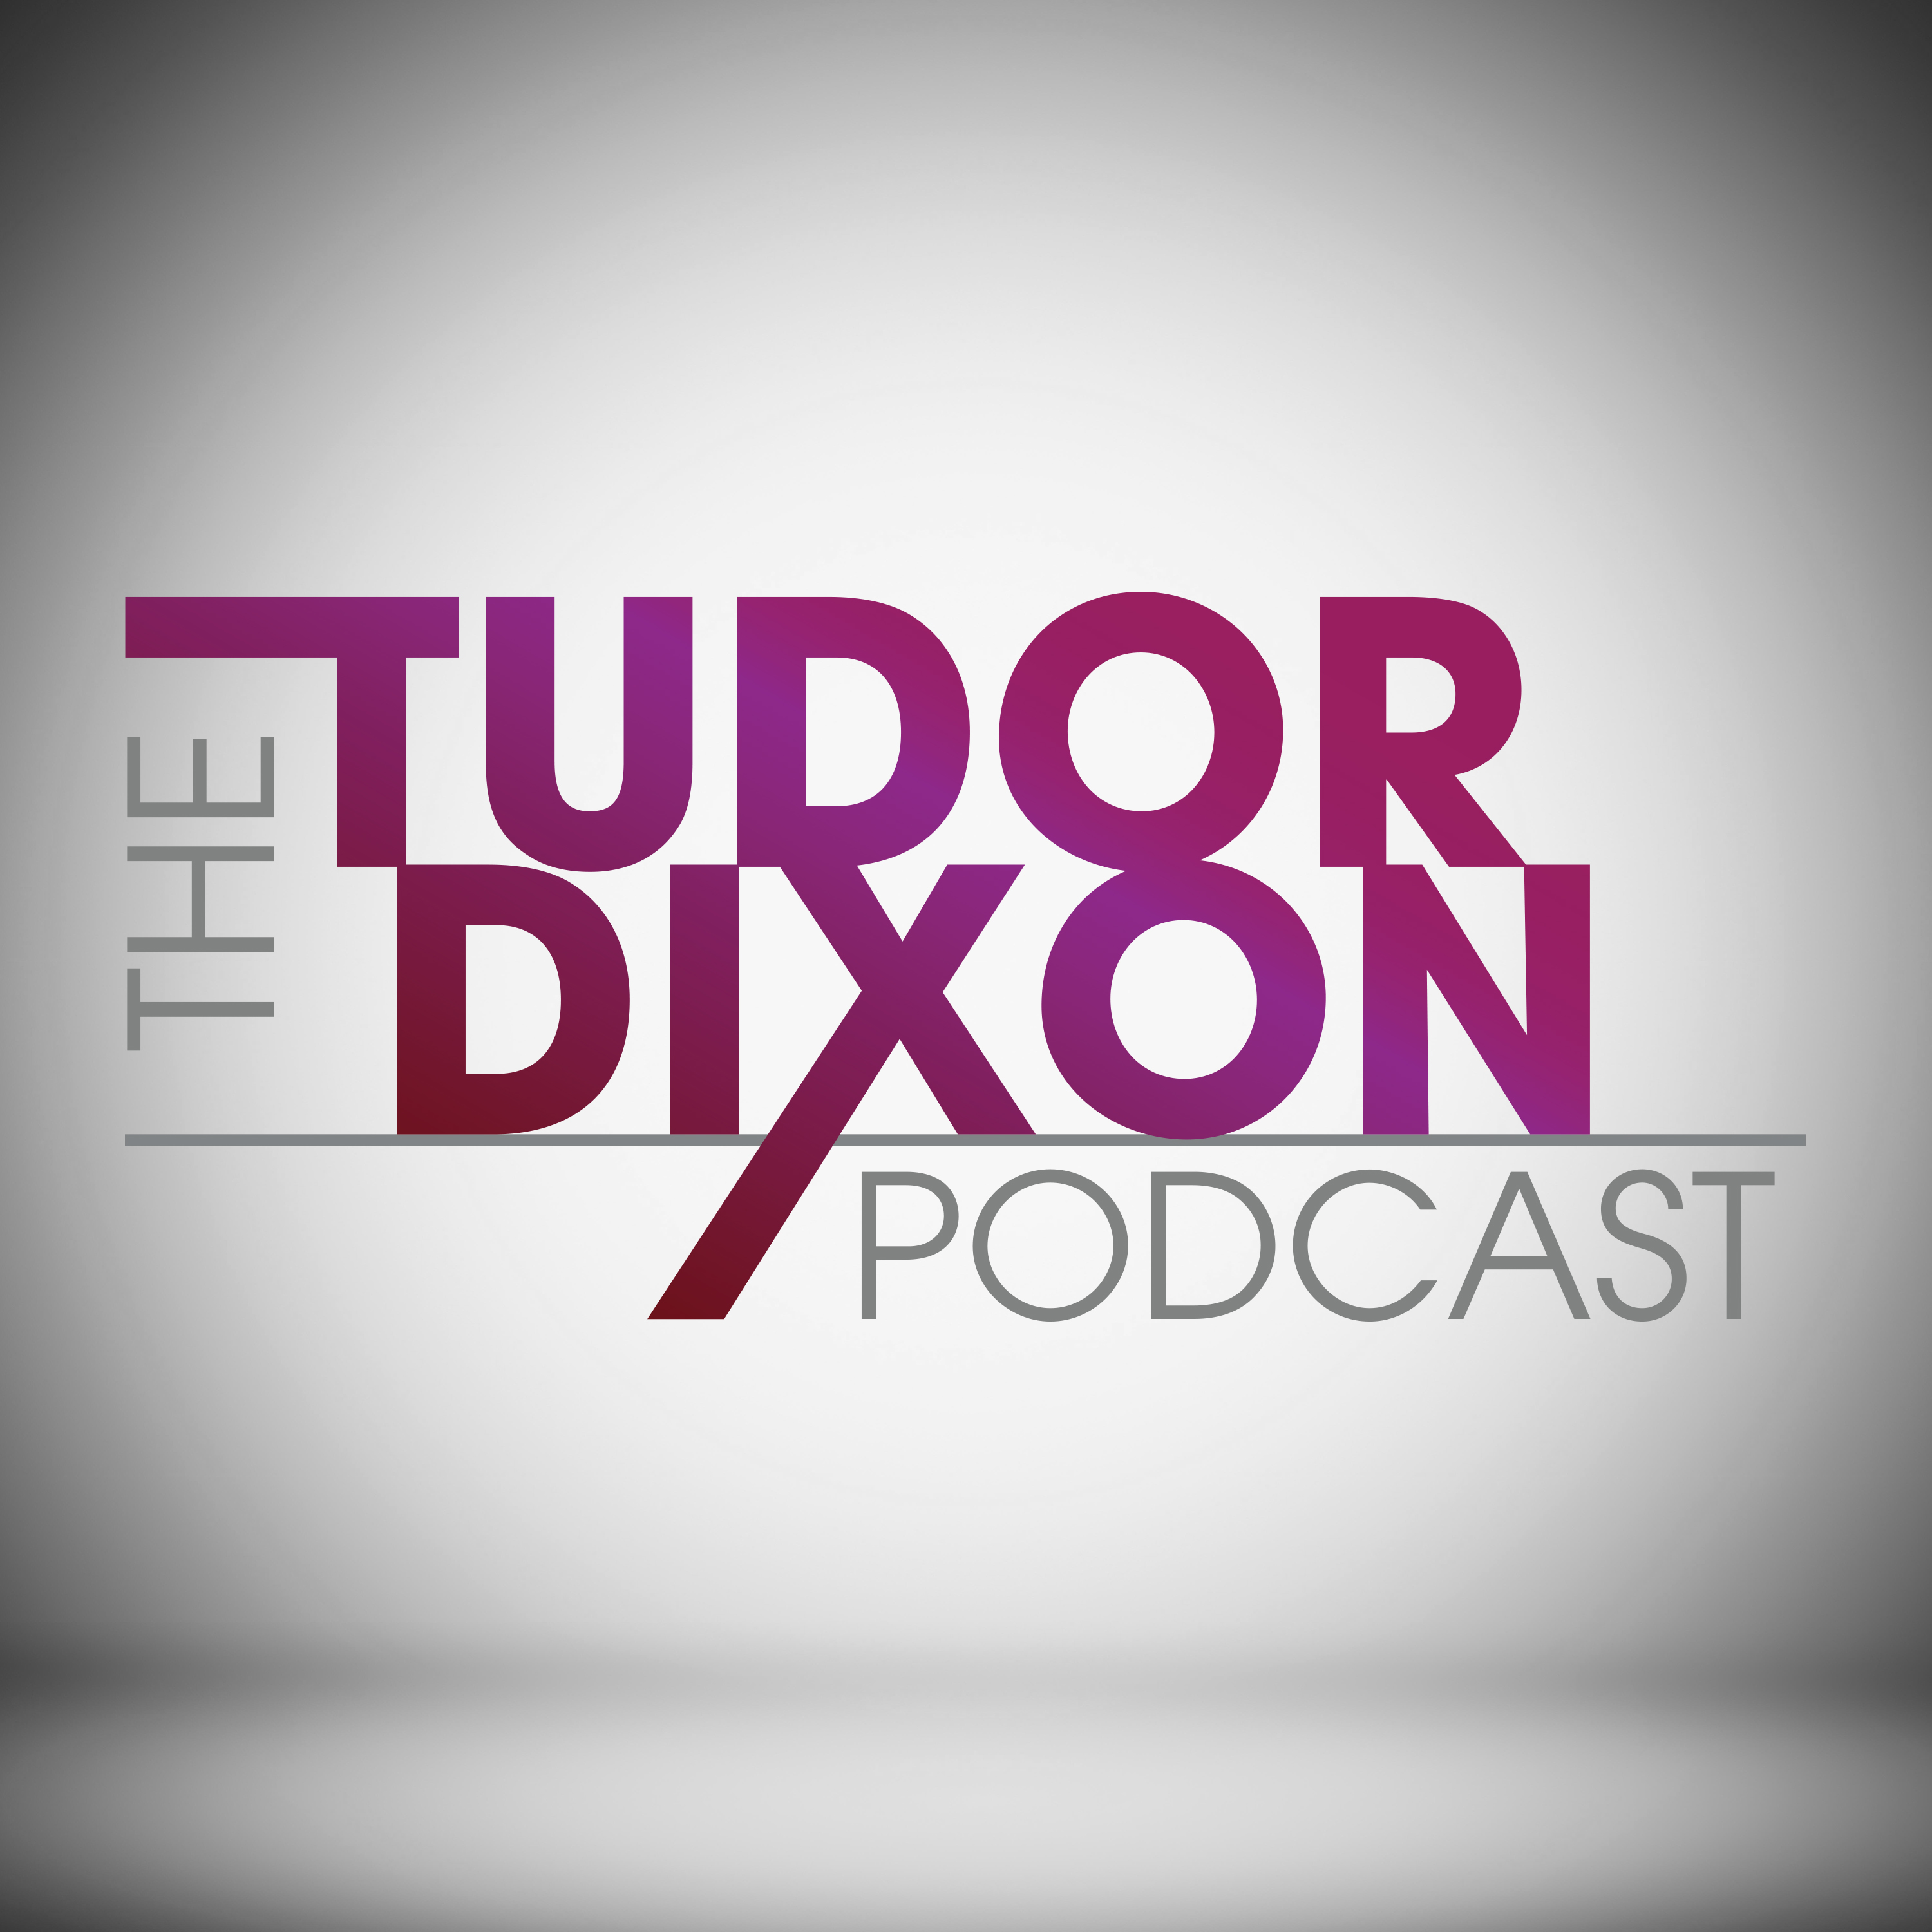 The Tudor Dixon Podcast: The Impact & Legacy of Martin Luther King, Jr. with Dr. Alveda King